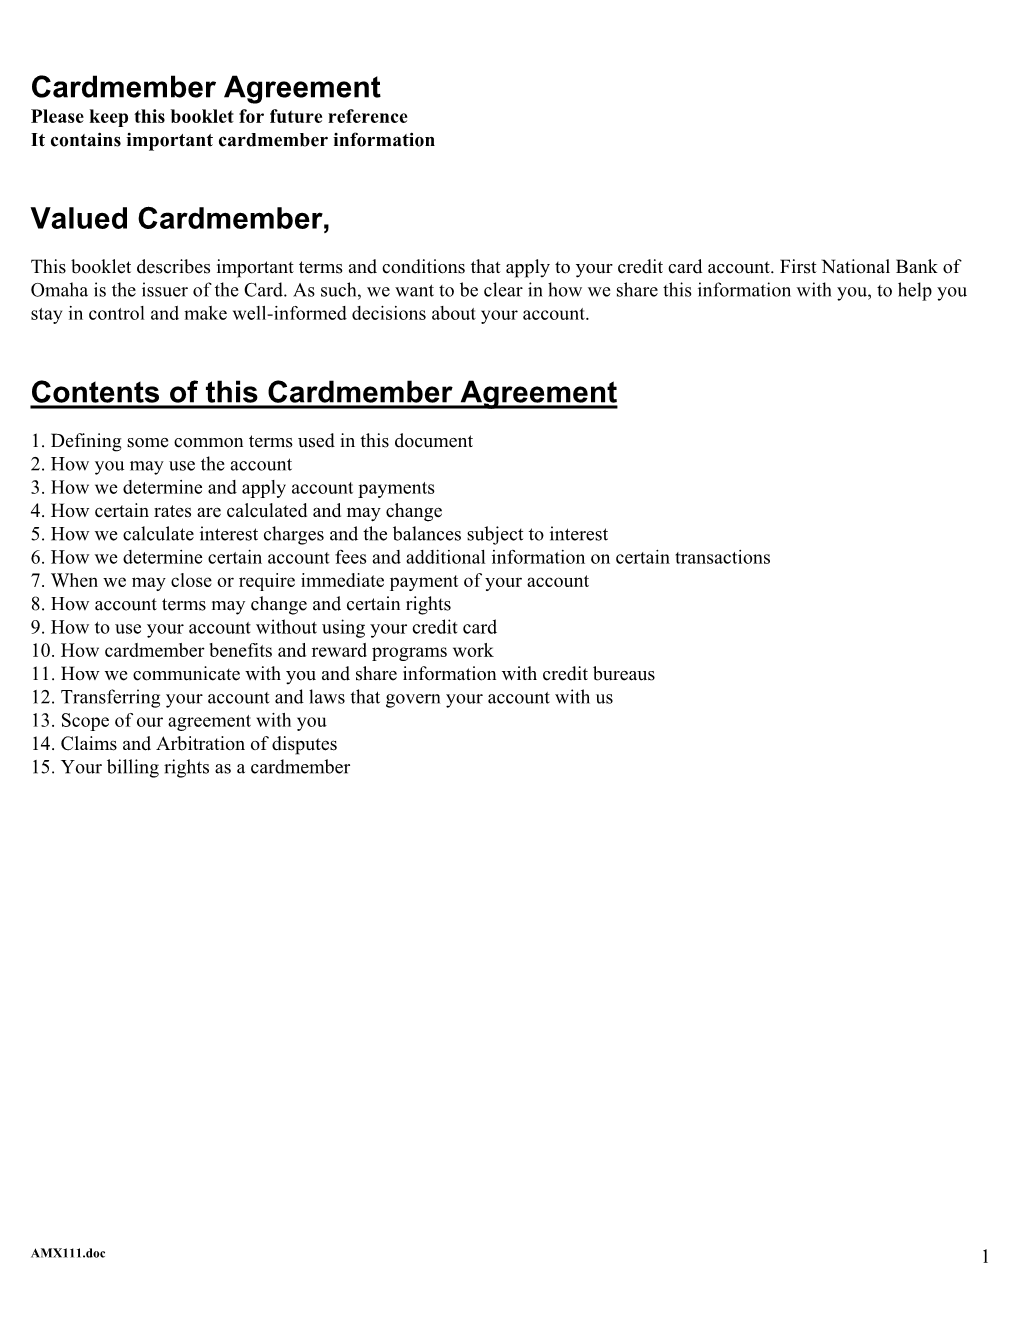 Cardmember Agreement Valued Cardmember, Contents of This Cardmember Agreement